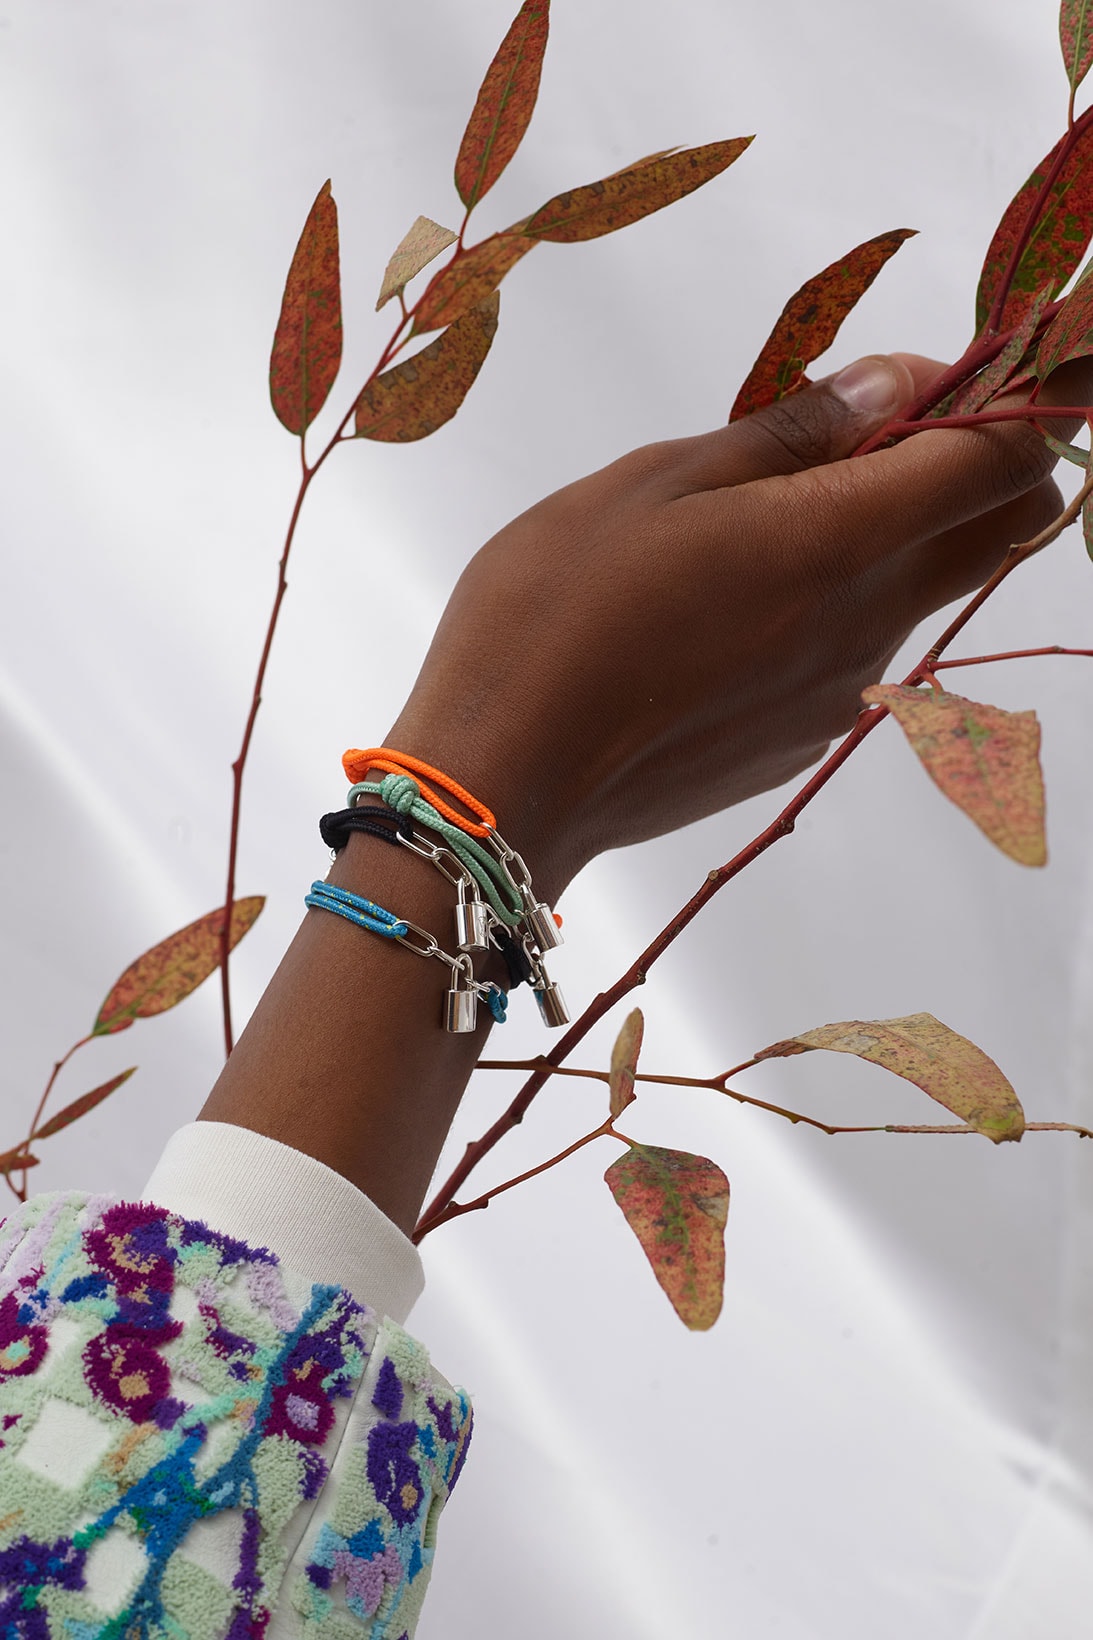 Louis Vuitton on X: #MAKEAPROMISE with @UNICEF and #LouisVuitton. This  year, the Silver Lockit bracelet is back in new colors to support @UNICEF's  efforts providing urgent care to vulnerable children. Learn more